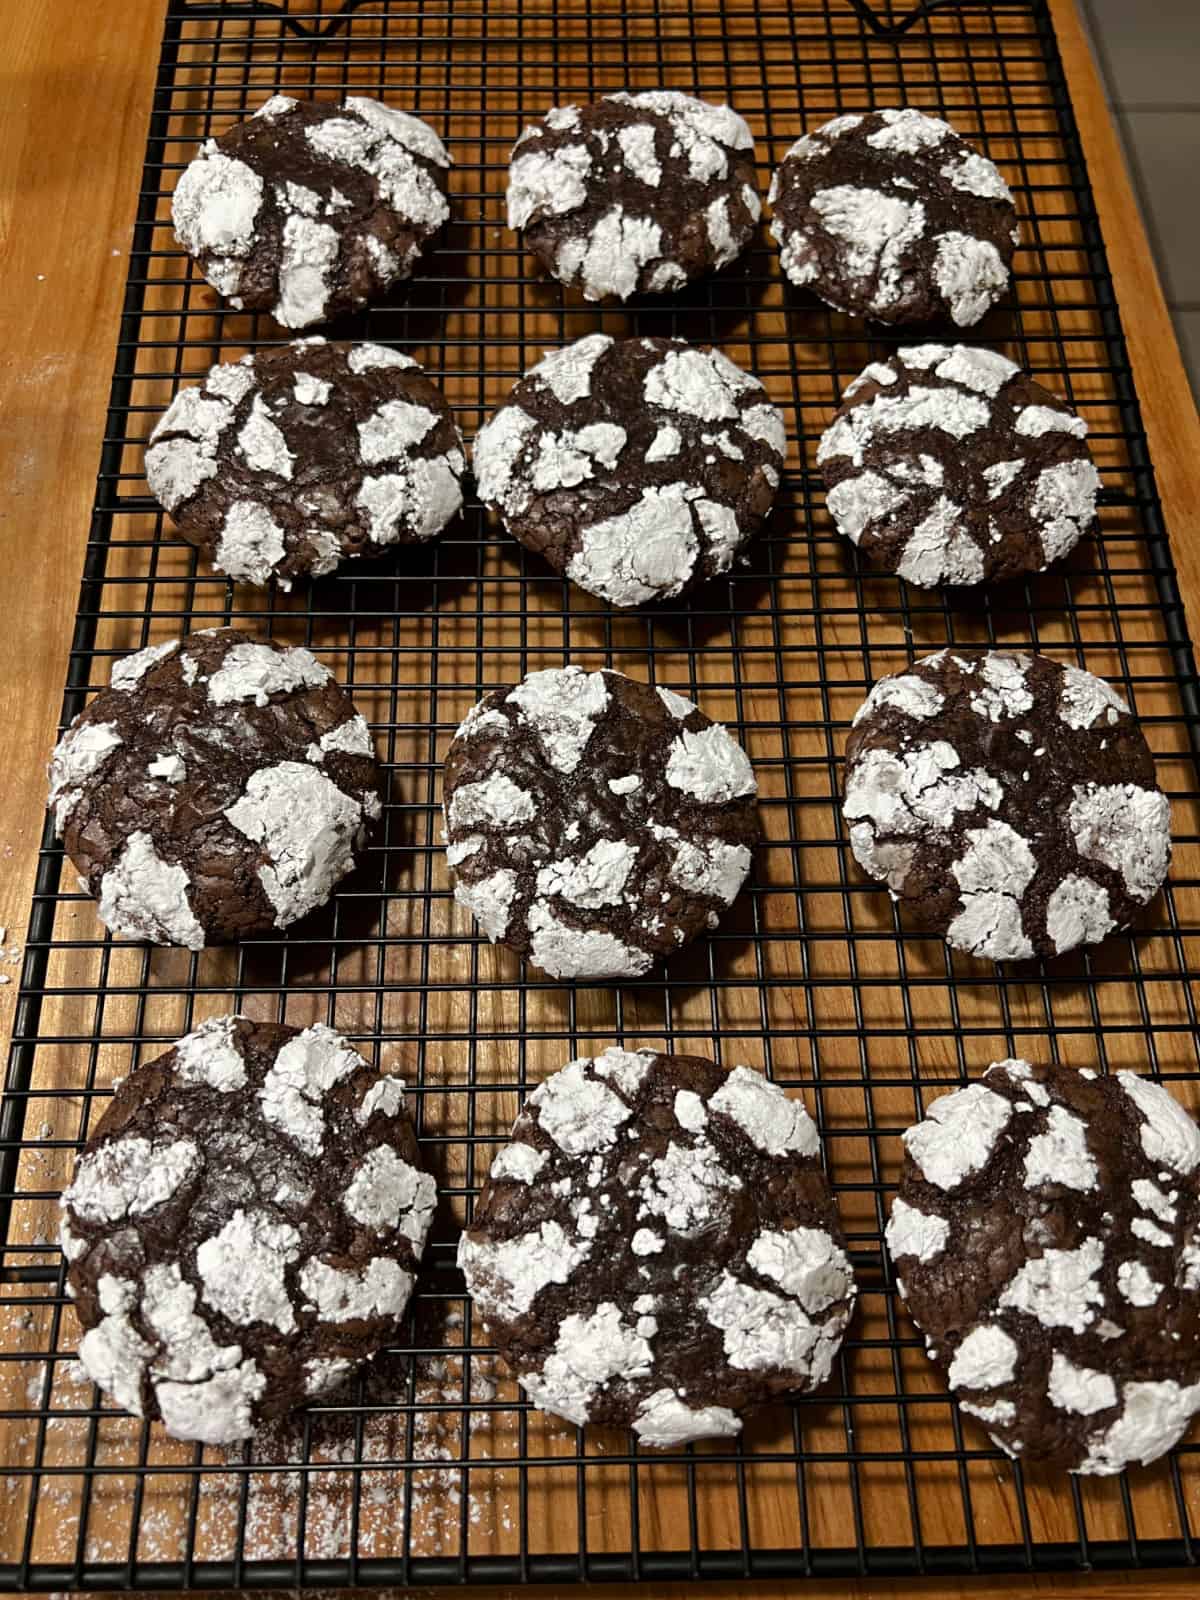 Brownie mix cookies cooling on a wire rack.